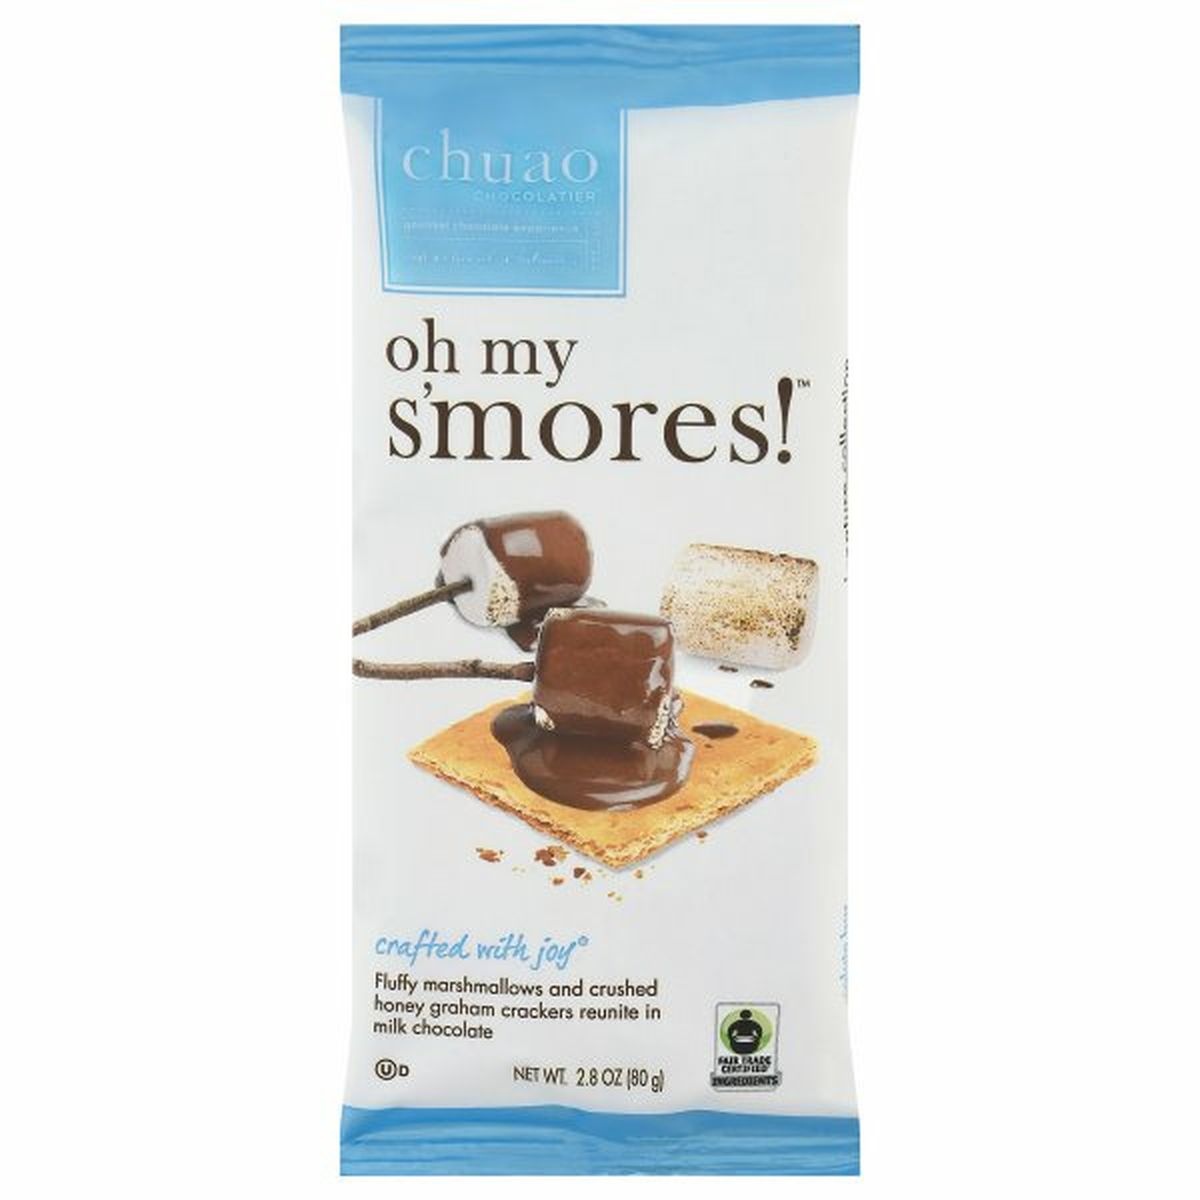 Calories in Chuao Chocolatier Milk Chocolate Bar, Oh My S'Mores!